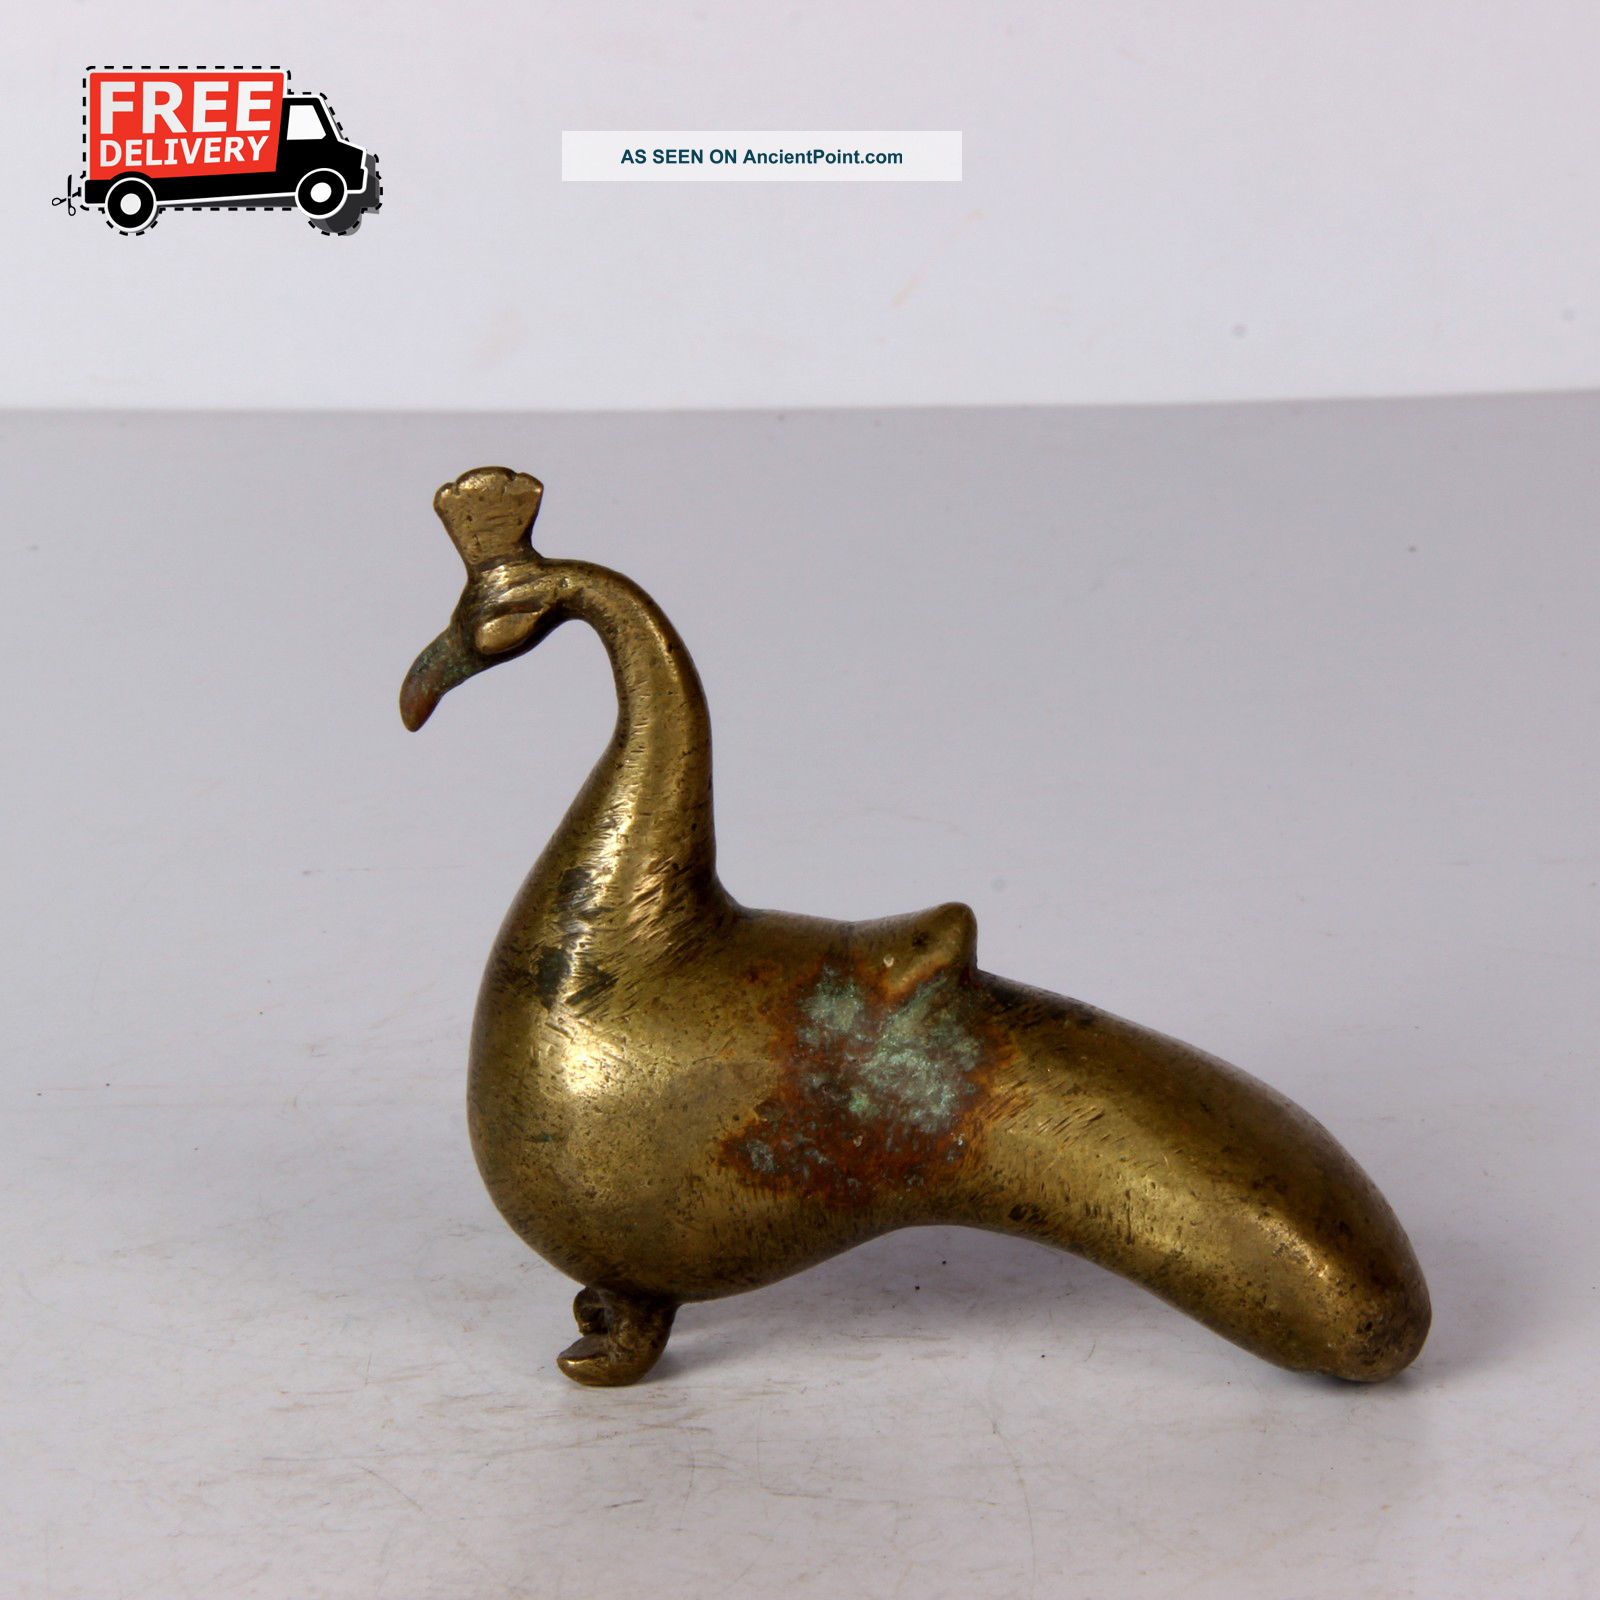 Vintage Antique Brass Animal Arts Of Peacock Made In India Rich Patina 1432 A India photo